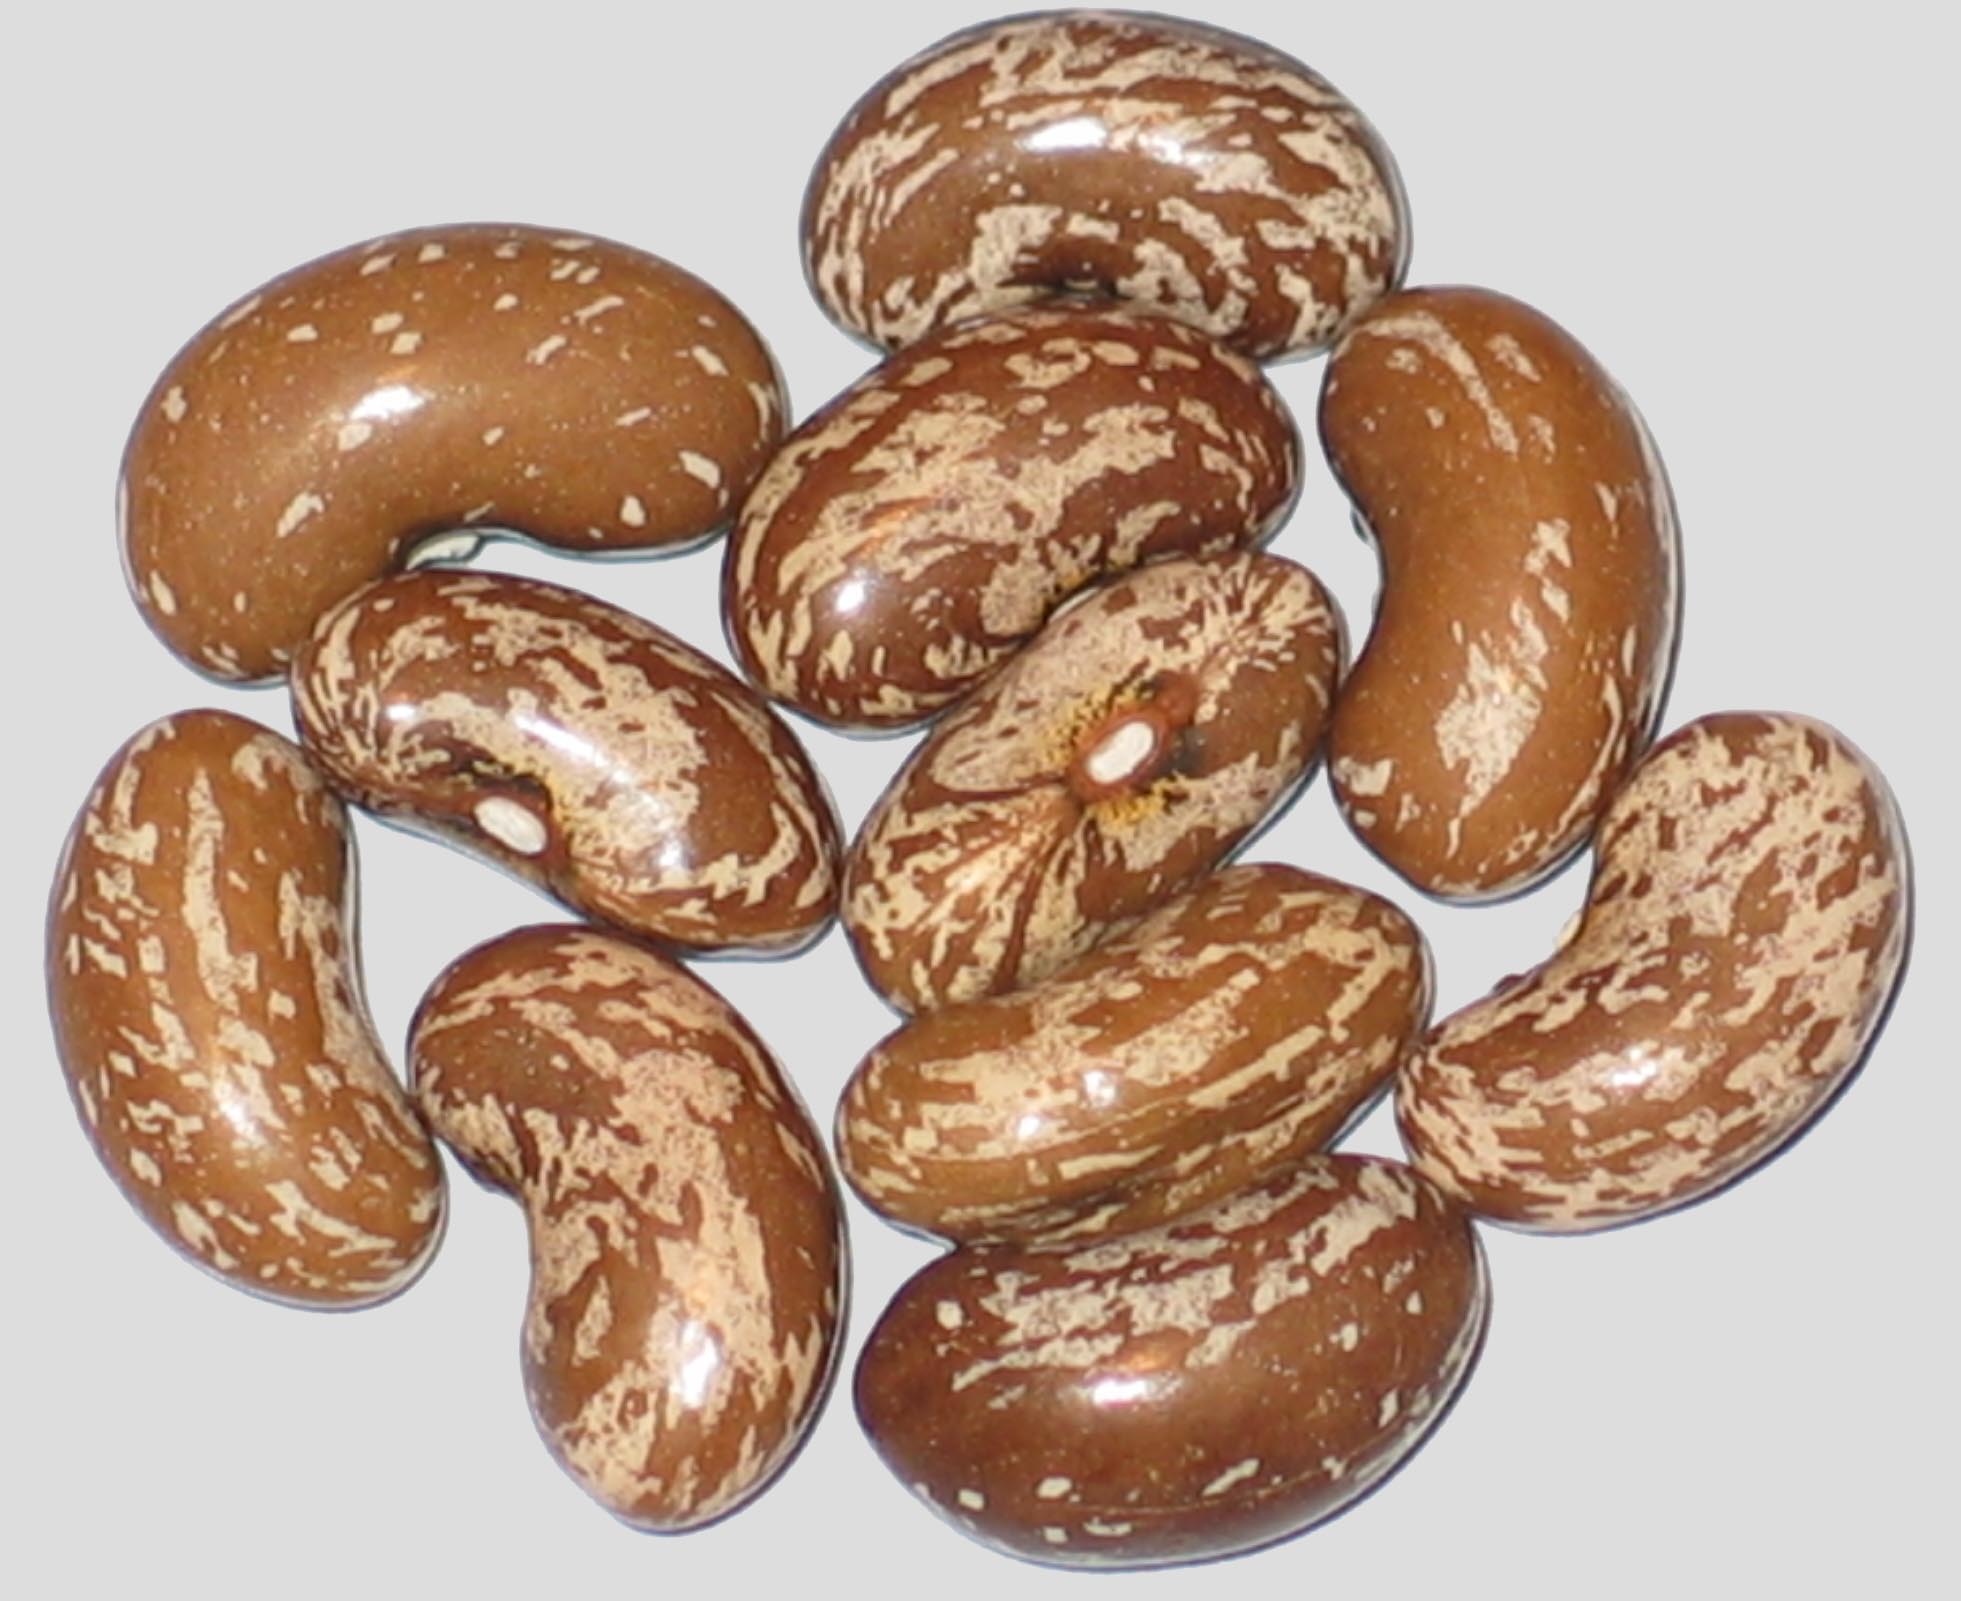 image of Union beans